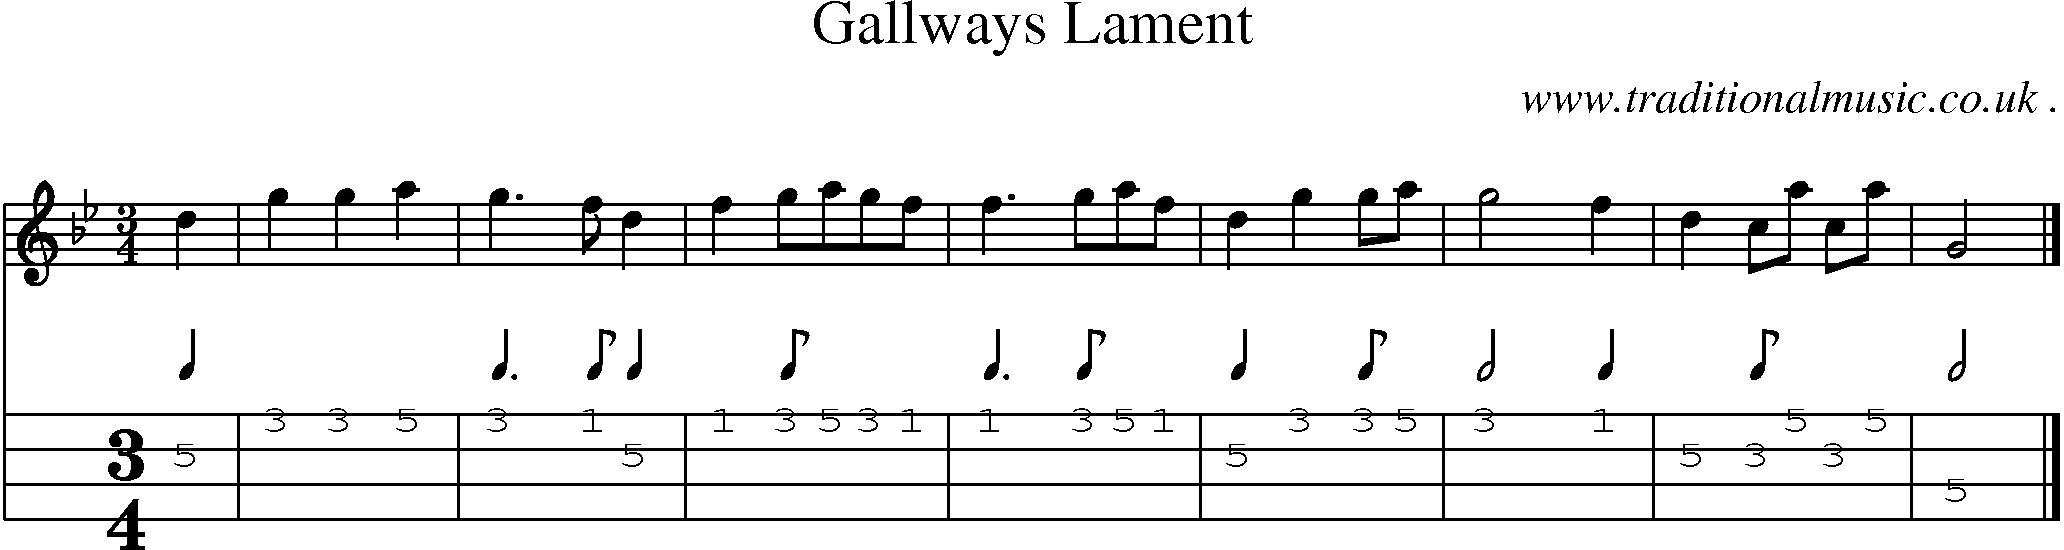 Sheet-music  score, Chords and Mandolin Tabs for Gallways Lament